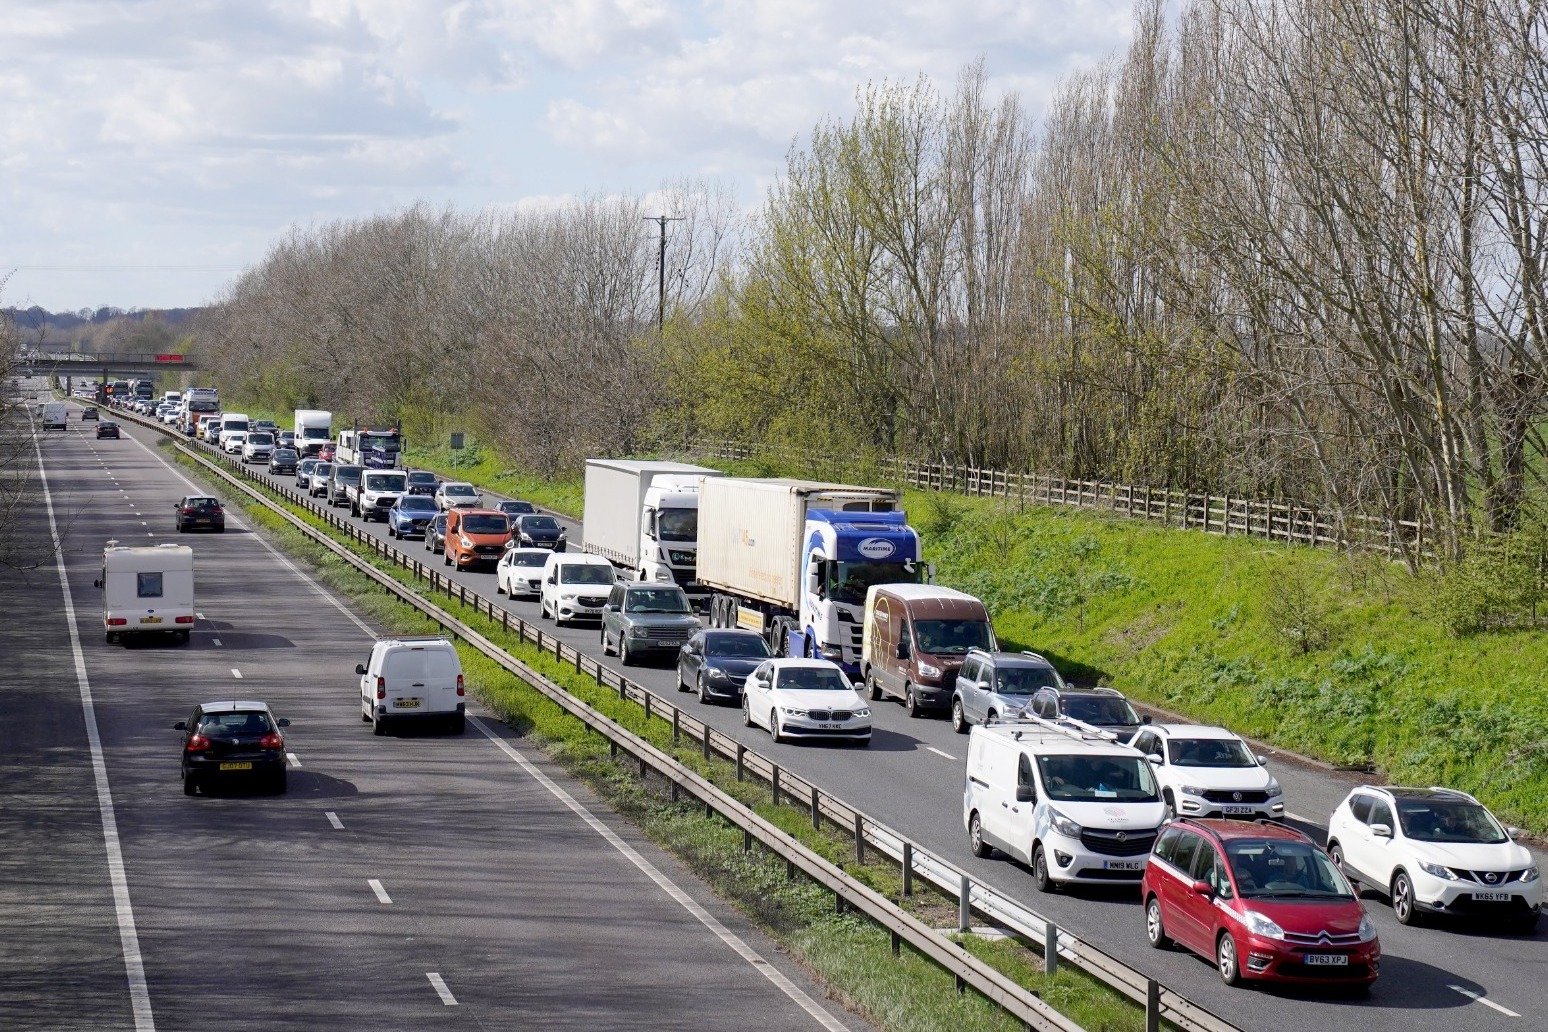 Chaos in Kent as 23-mile stretch of M20 closed due to ferry shortage 